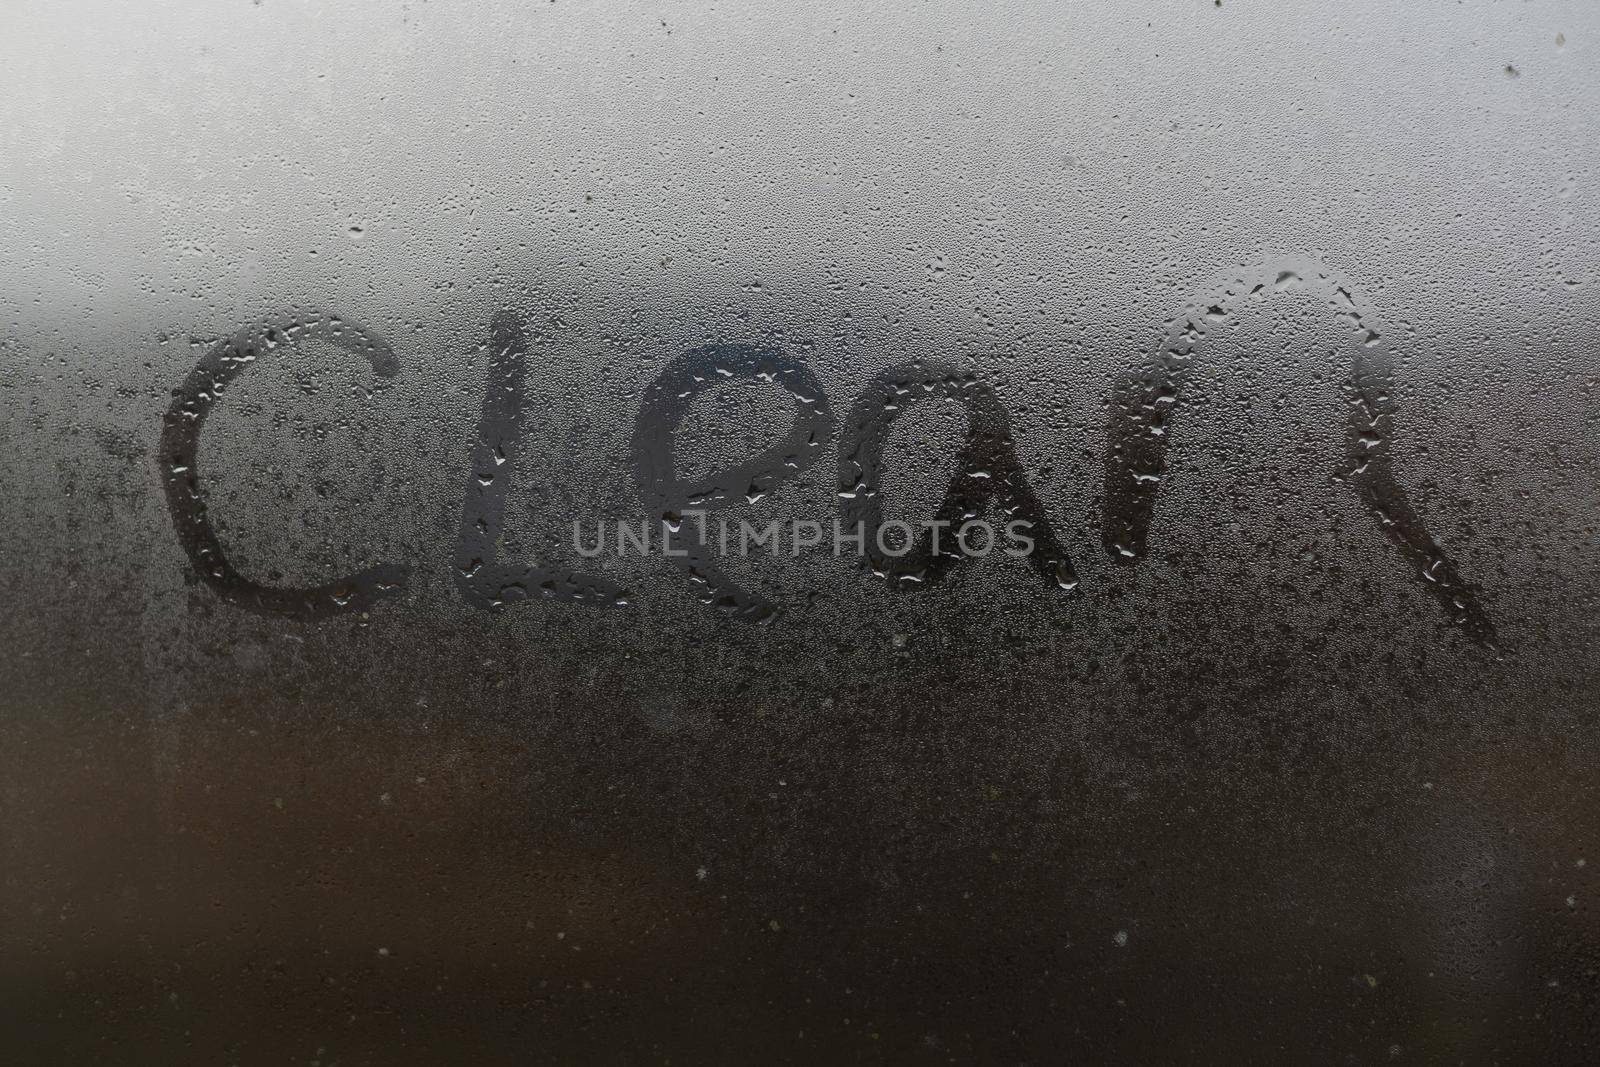 the word clean on a foggy window.